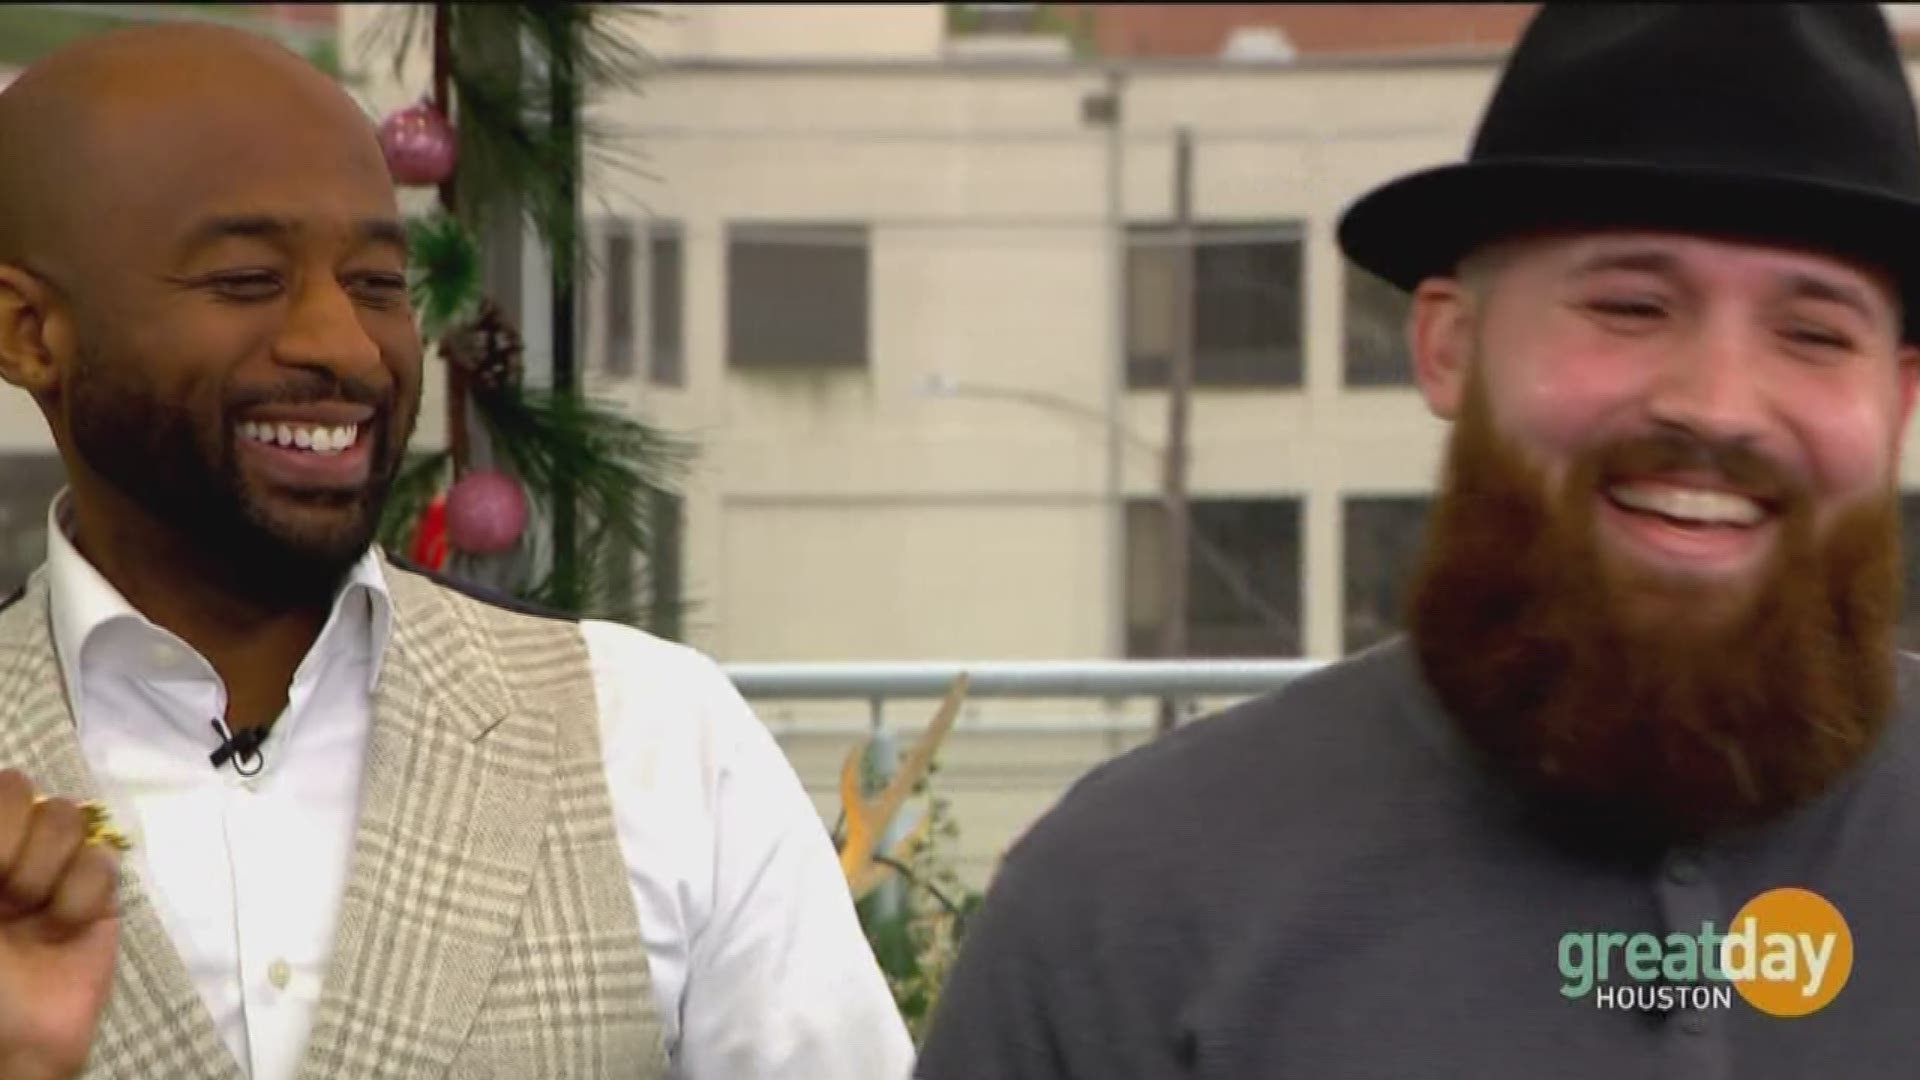 Lifestyle experts Mikel Welch and Buffalo Joe showcase the best Christmas gifts for men.